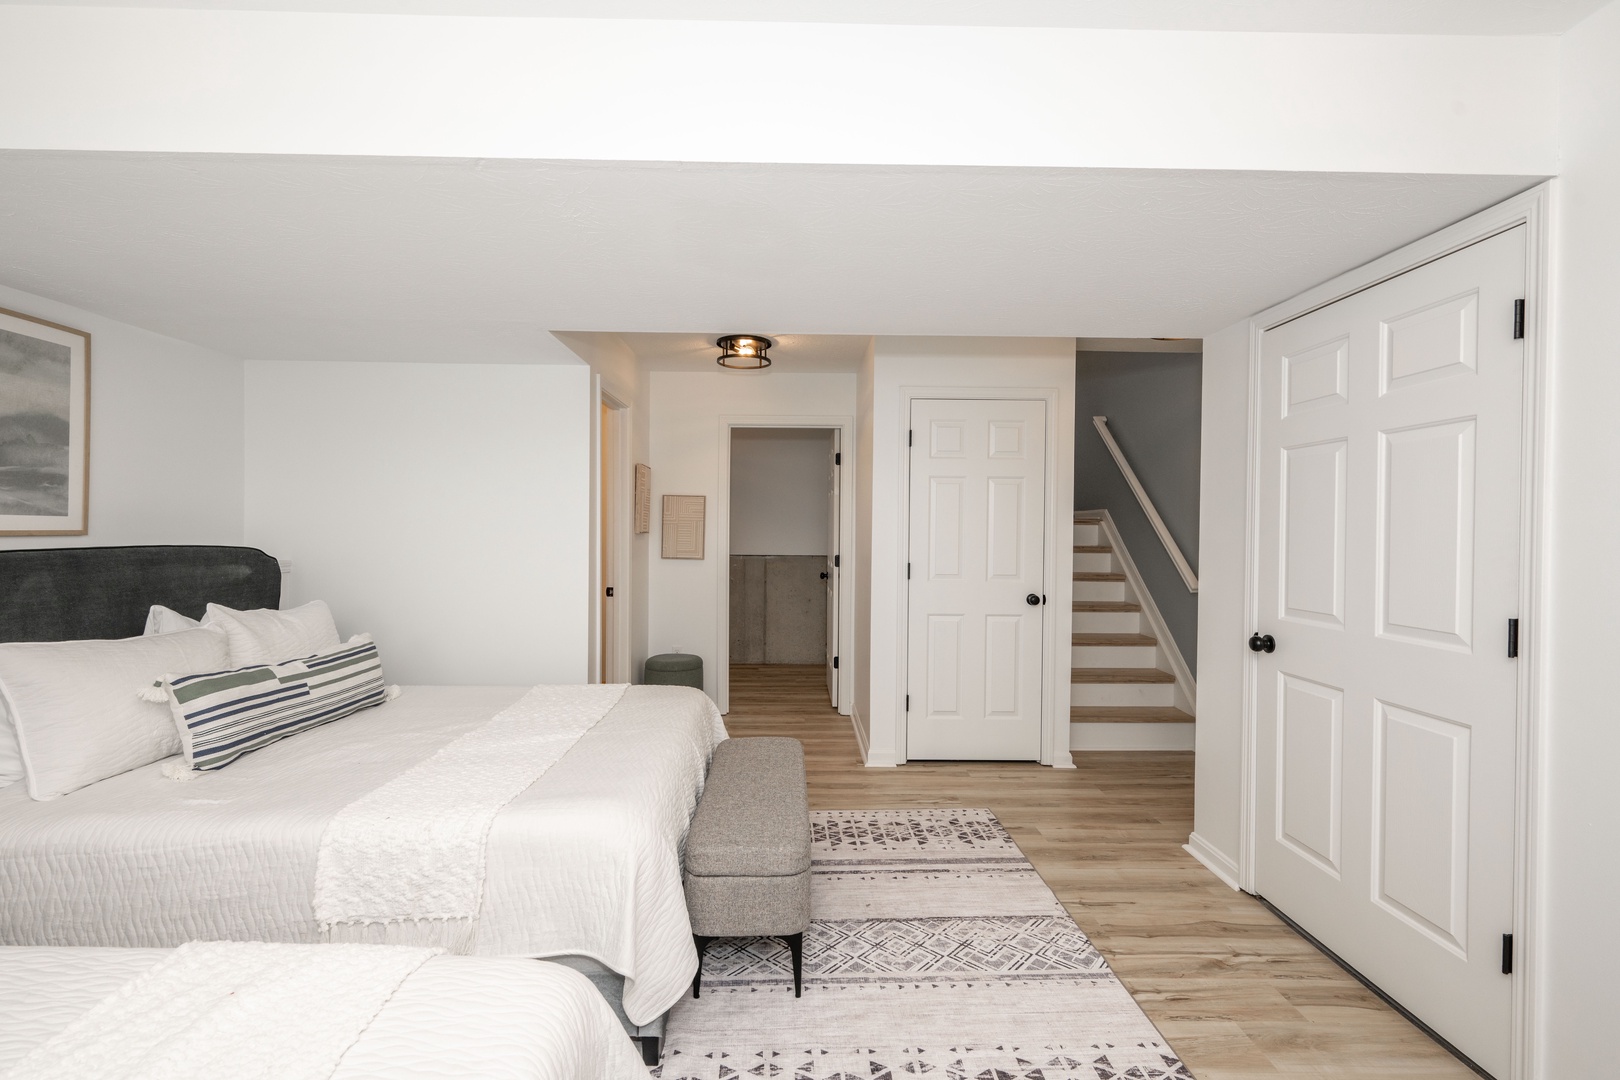 This private basement bedroom includes 2 queen beds & a half bath ensuite